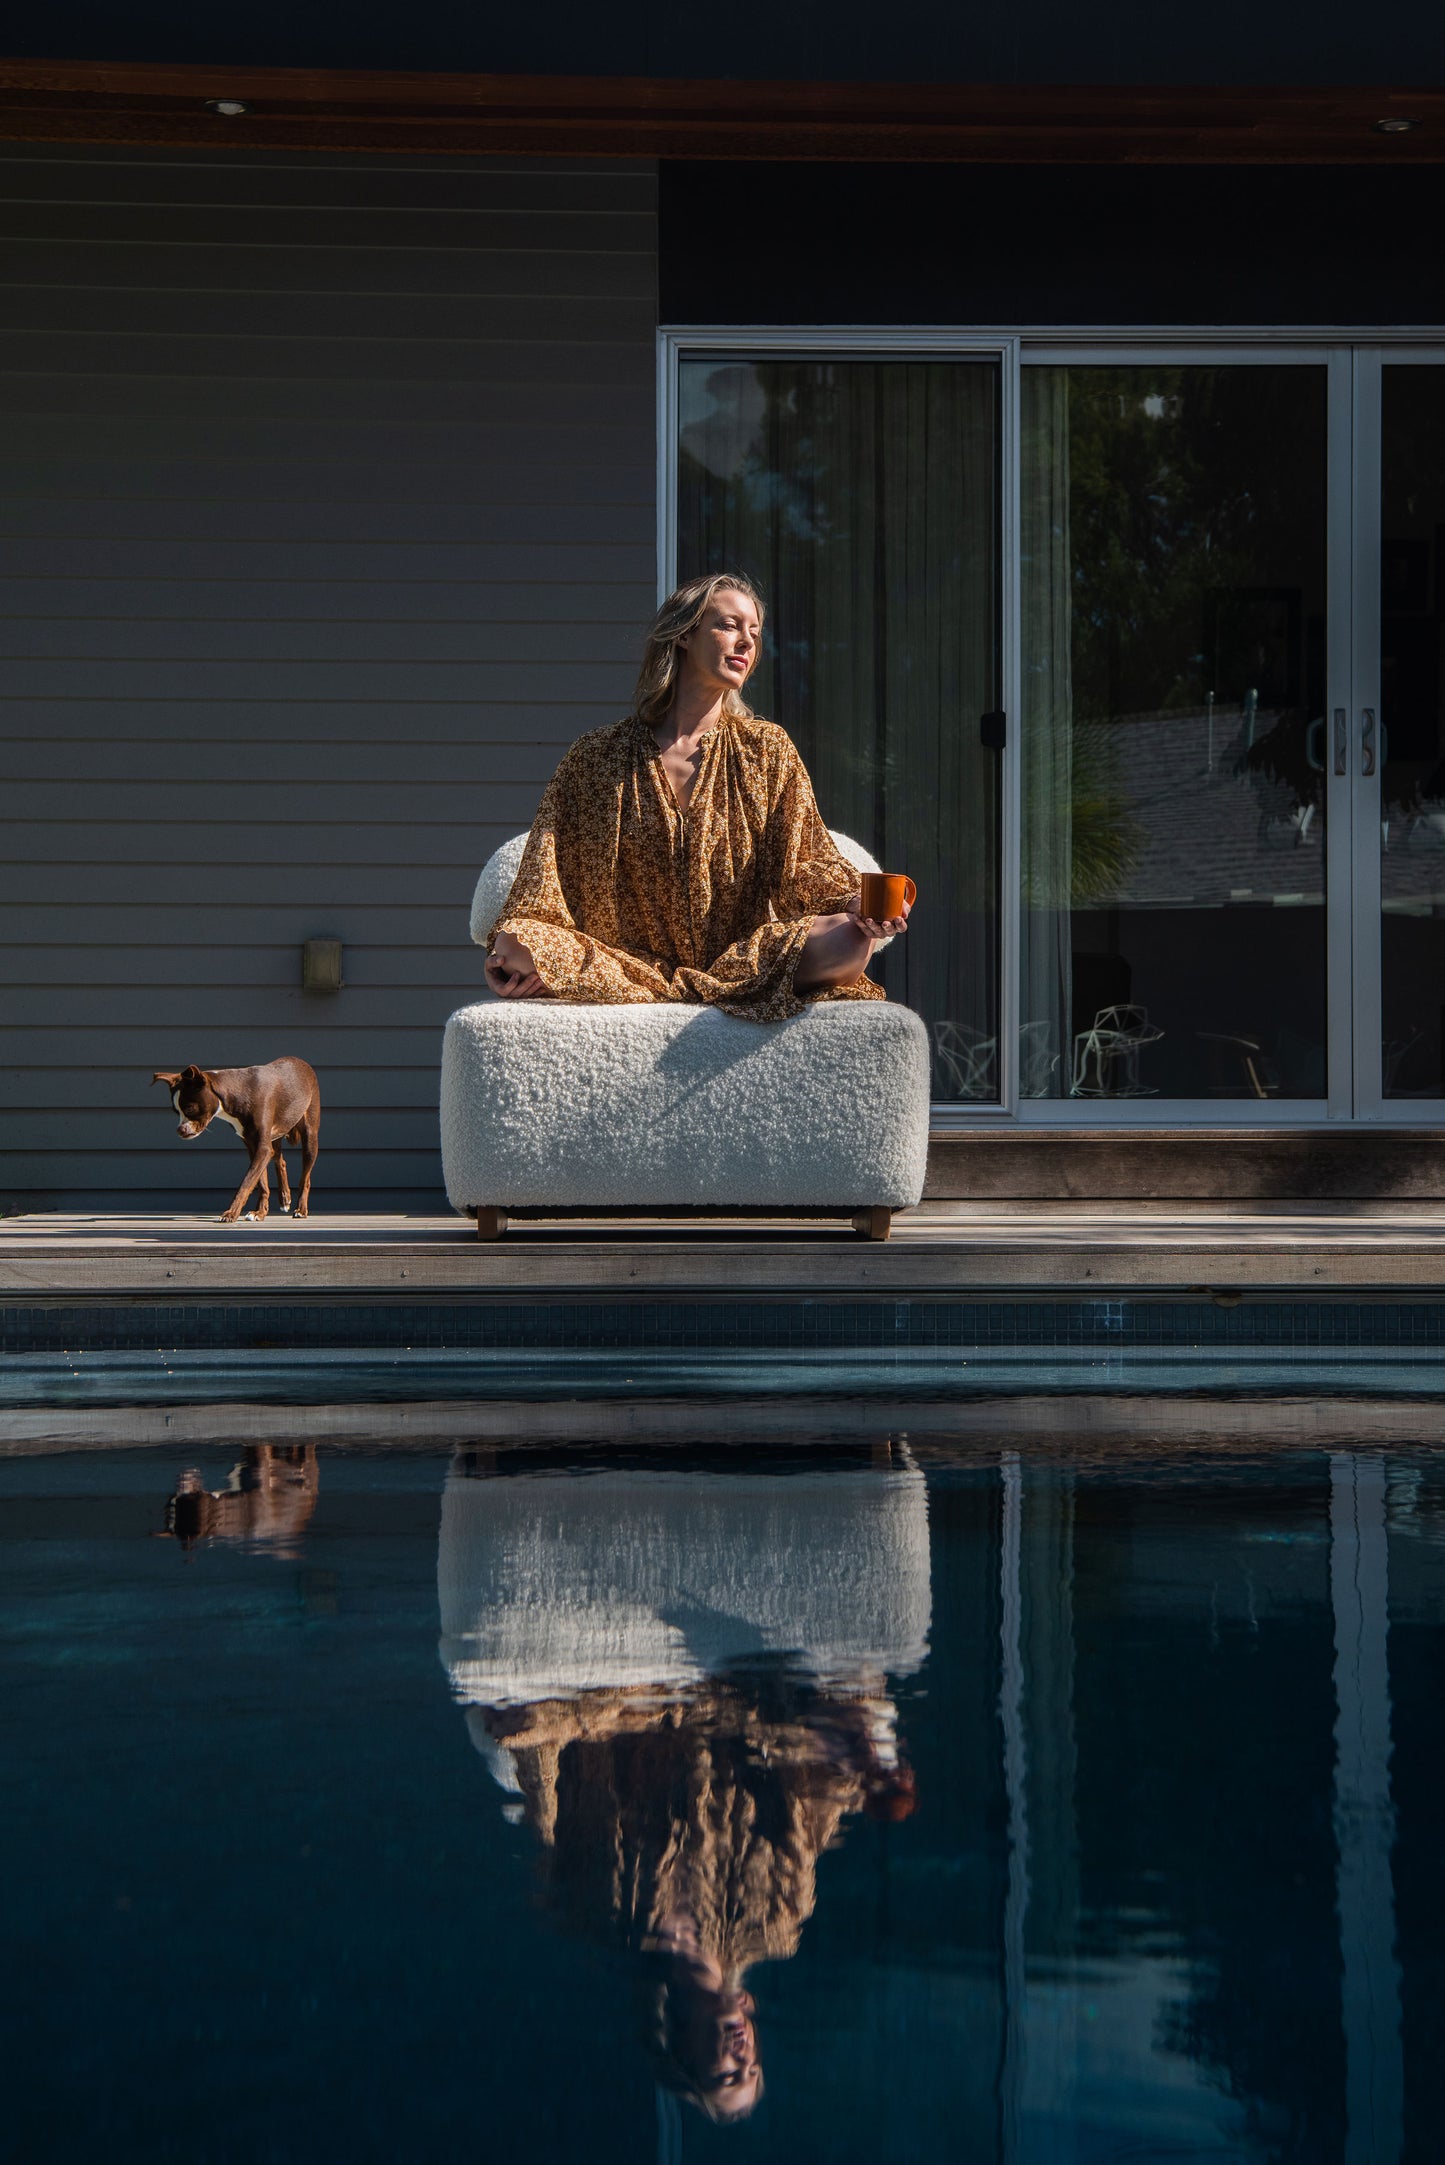 Women Sitting on Meditation Chair by Rue and Williams Home at private residence with a pool and dog standing beside her.  Woman is in mediation pose. Modern design with no arms and a curved back, perfect for enhancing mindfulness practices and adding tranquility to any space.